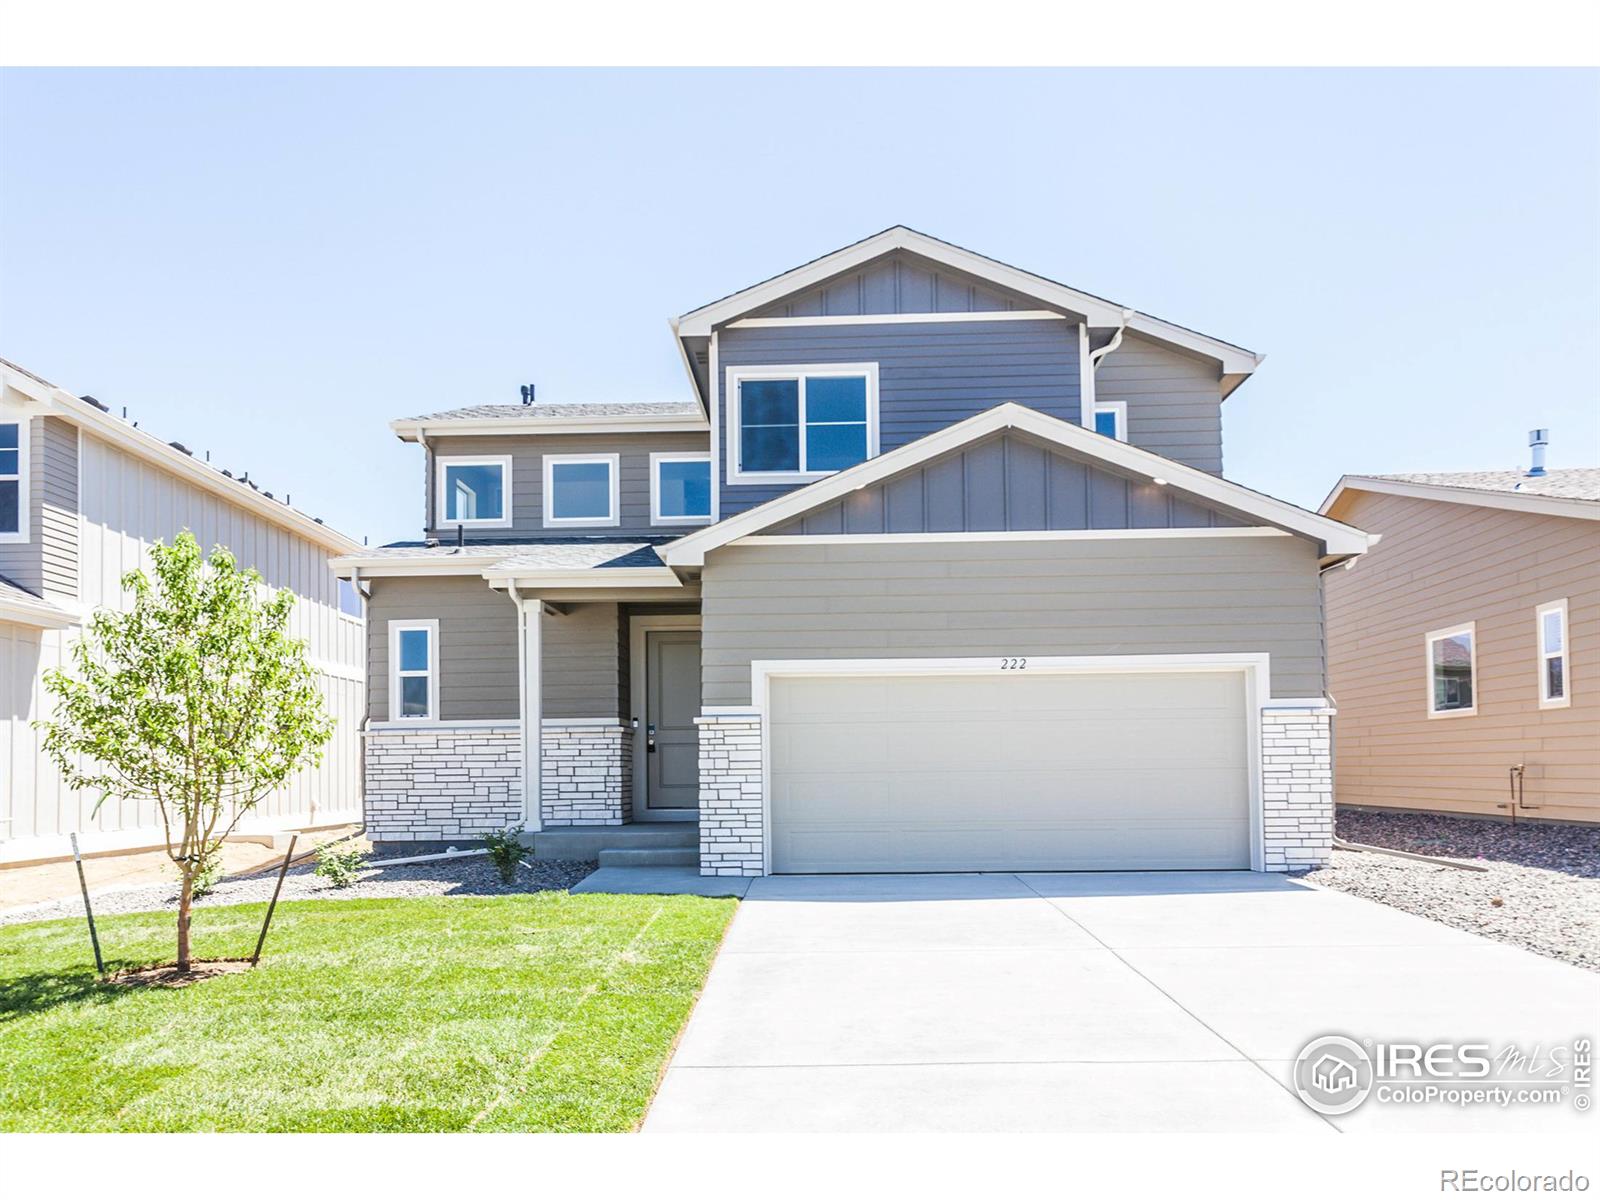 1222  105th Ave Ct, greeley MLS: 4567891009298 Beds: 3 Baths: 3 Price: $500,000